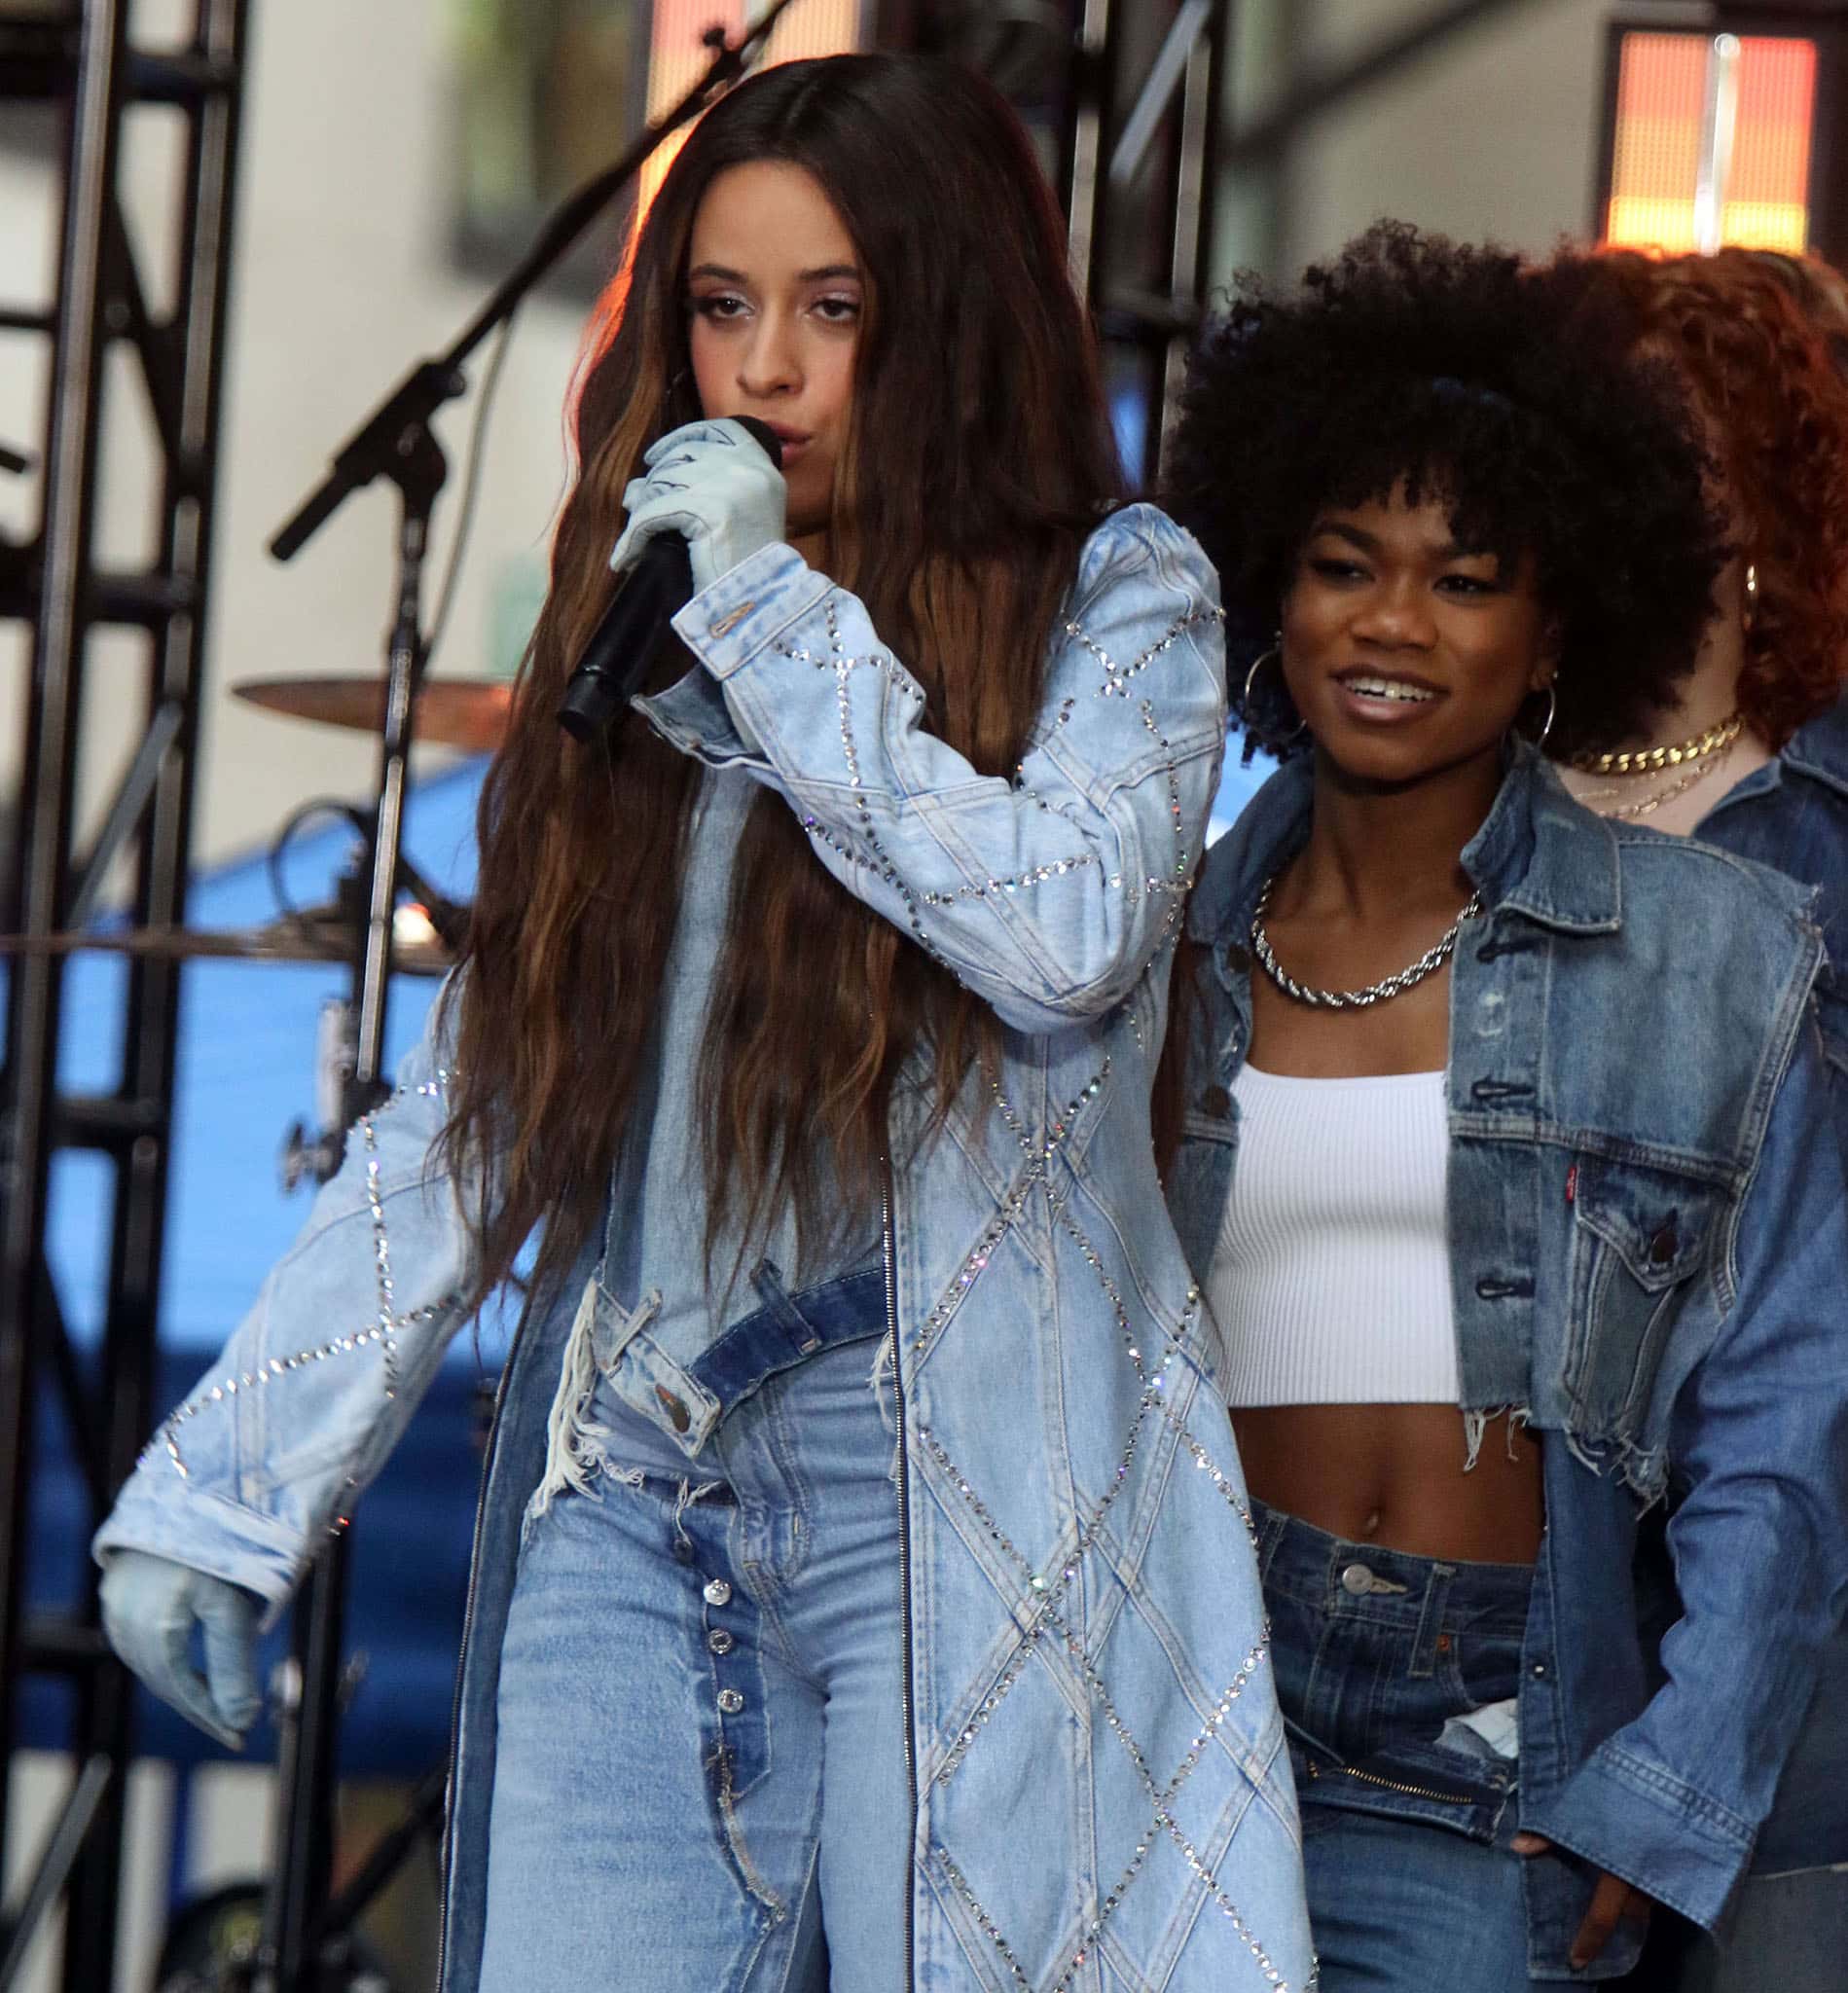 Camila Cabello channels Britney Spears in a double-denim outfit for the Today Show’s Citi Concert Series on April 12, 2022